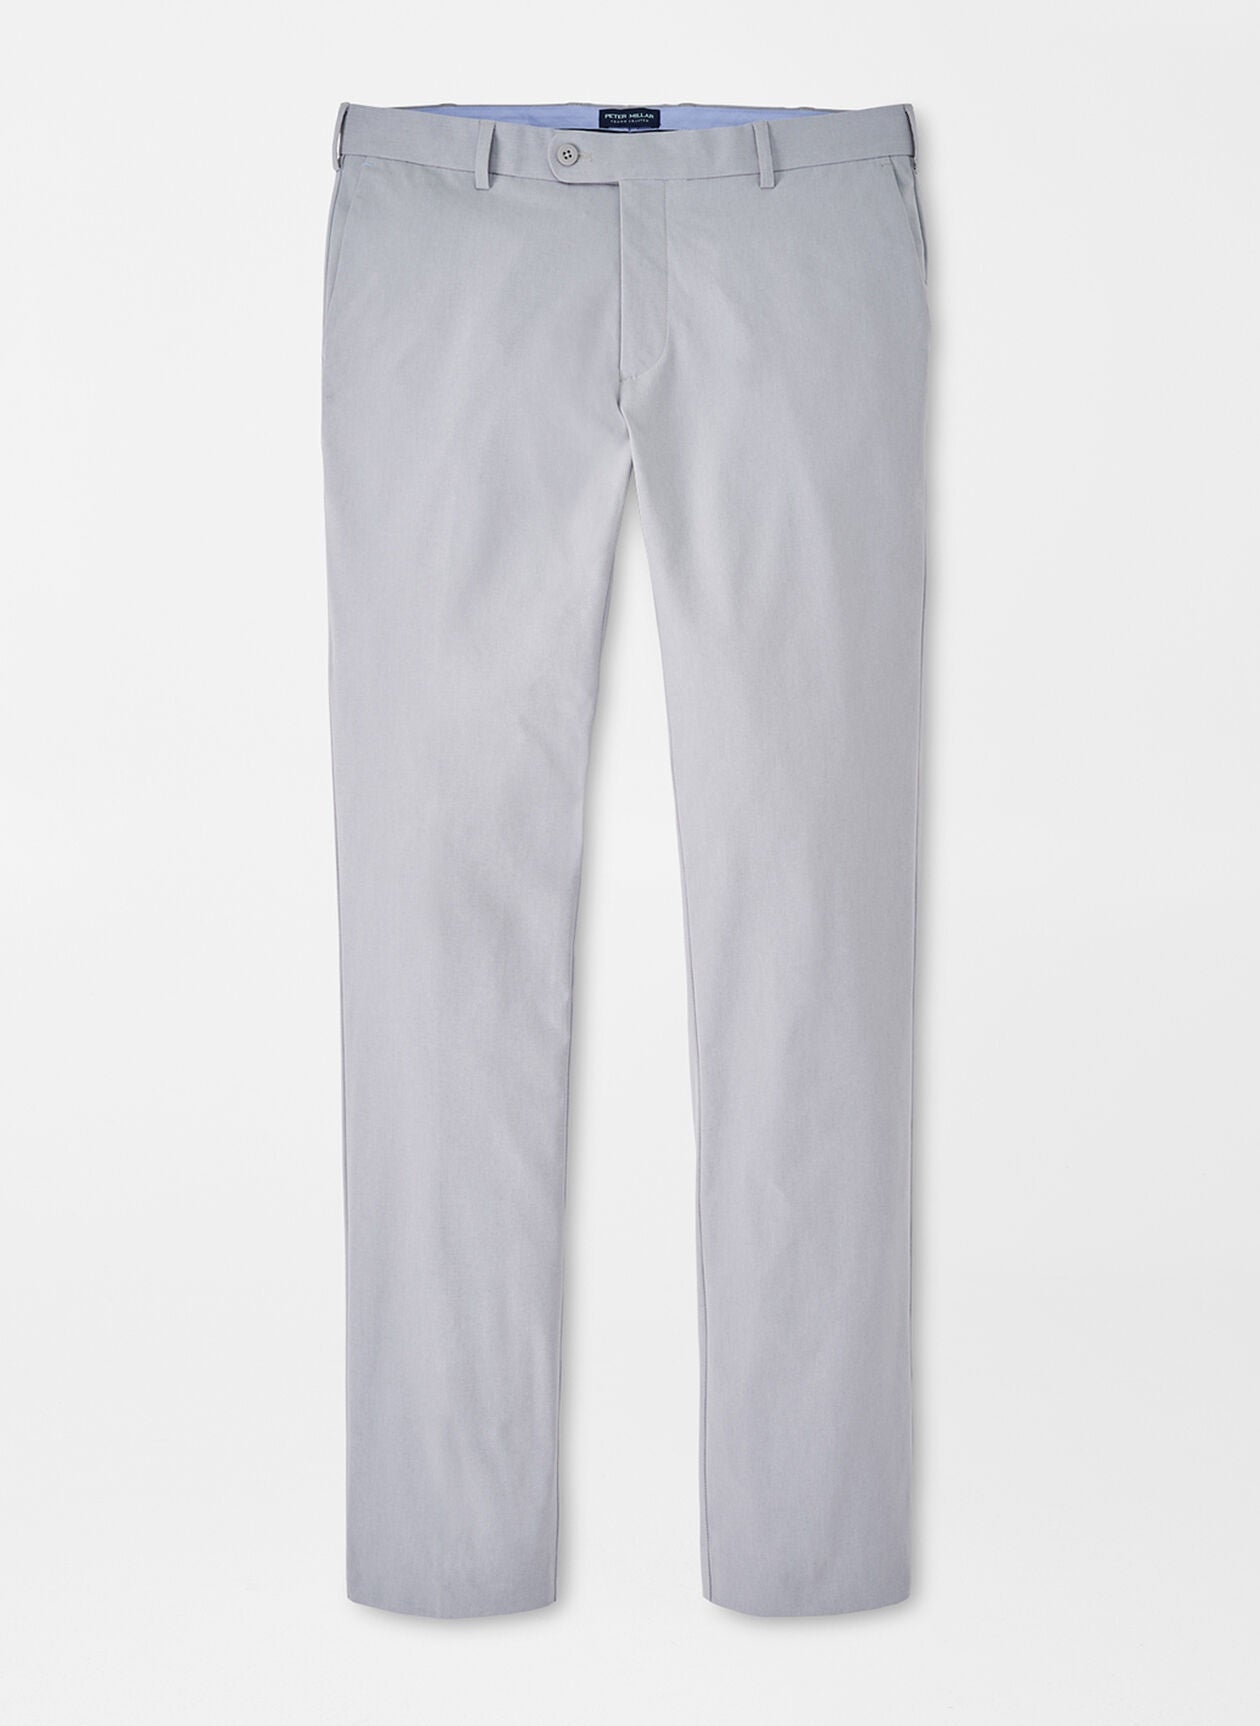 Peter Millar Surge Performance Trouser in Gale Grey – Hornor & Harrison